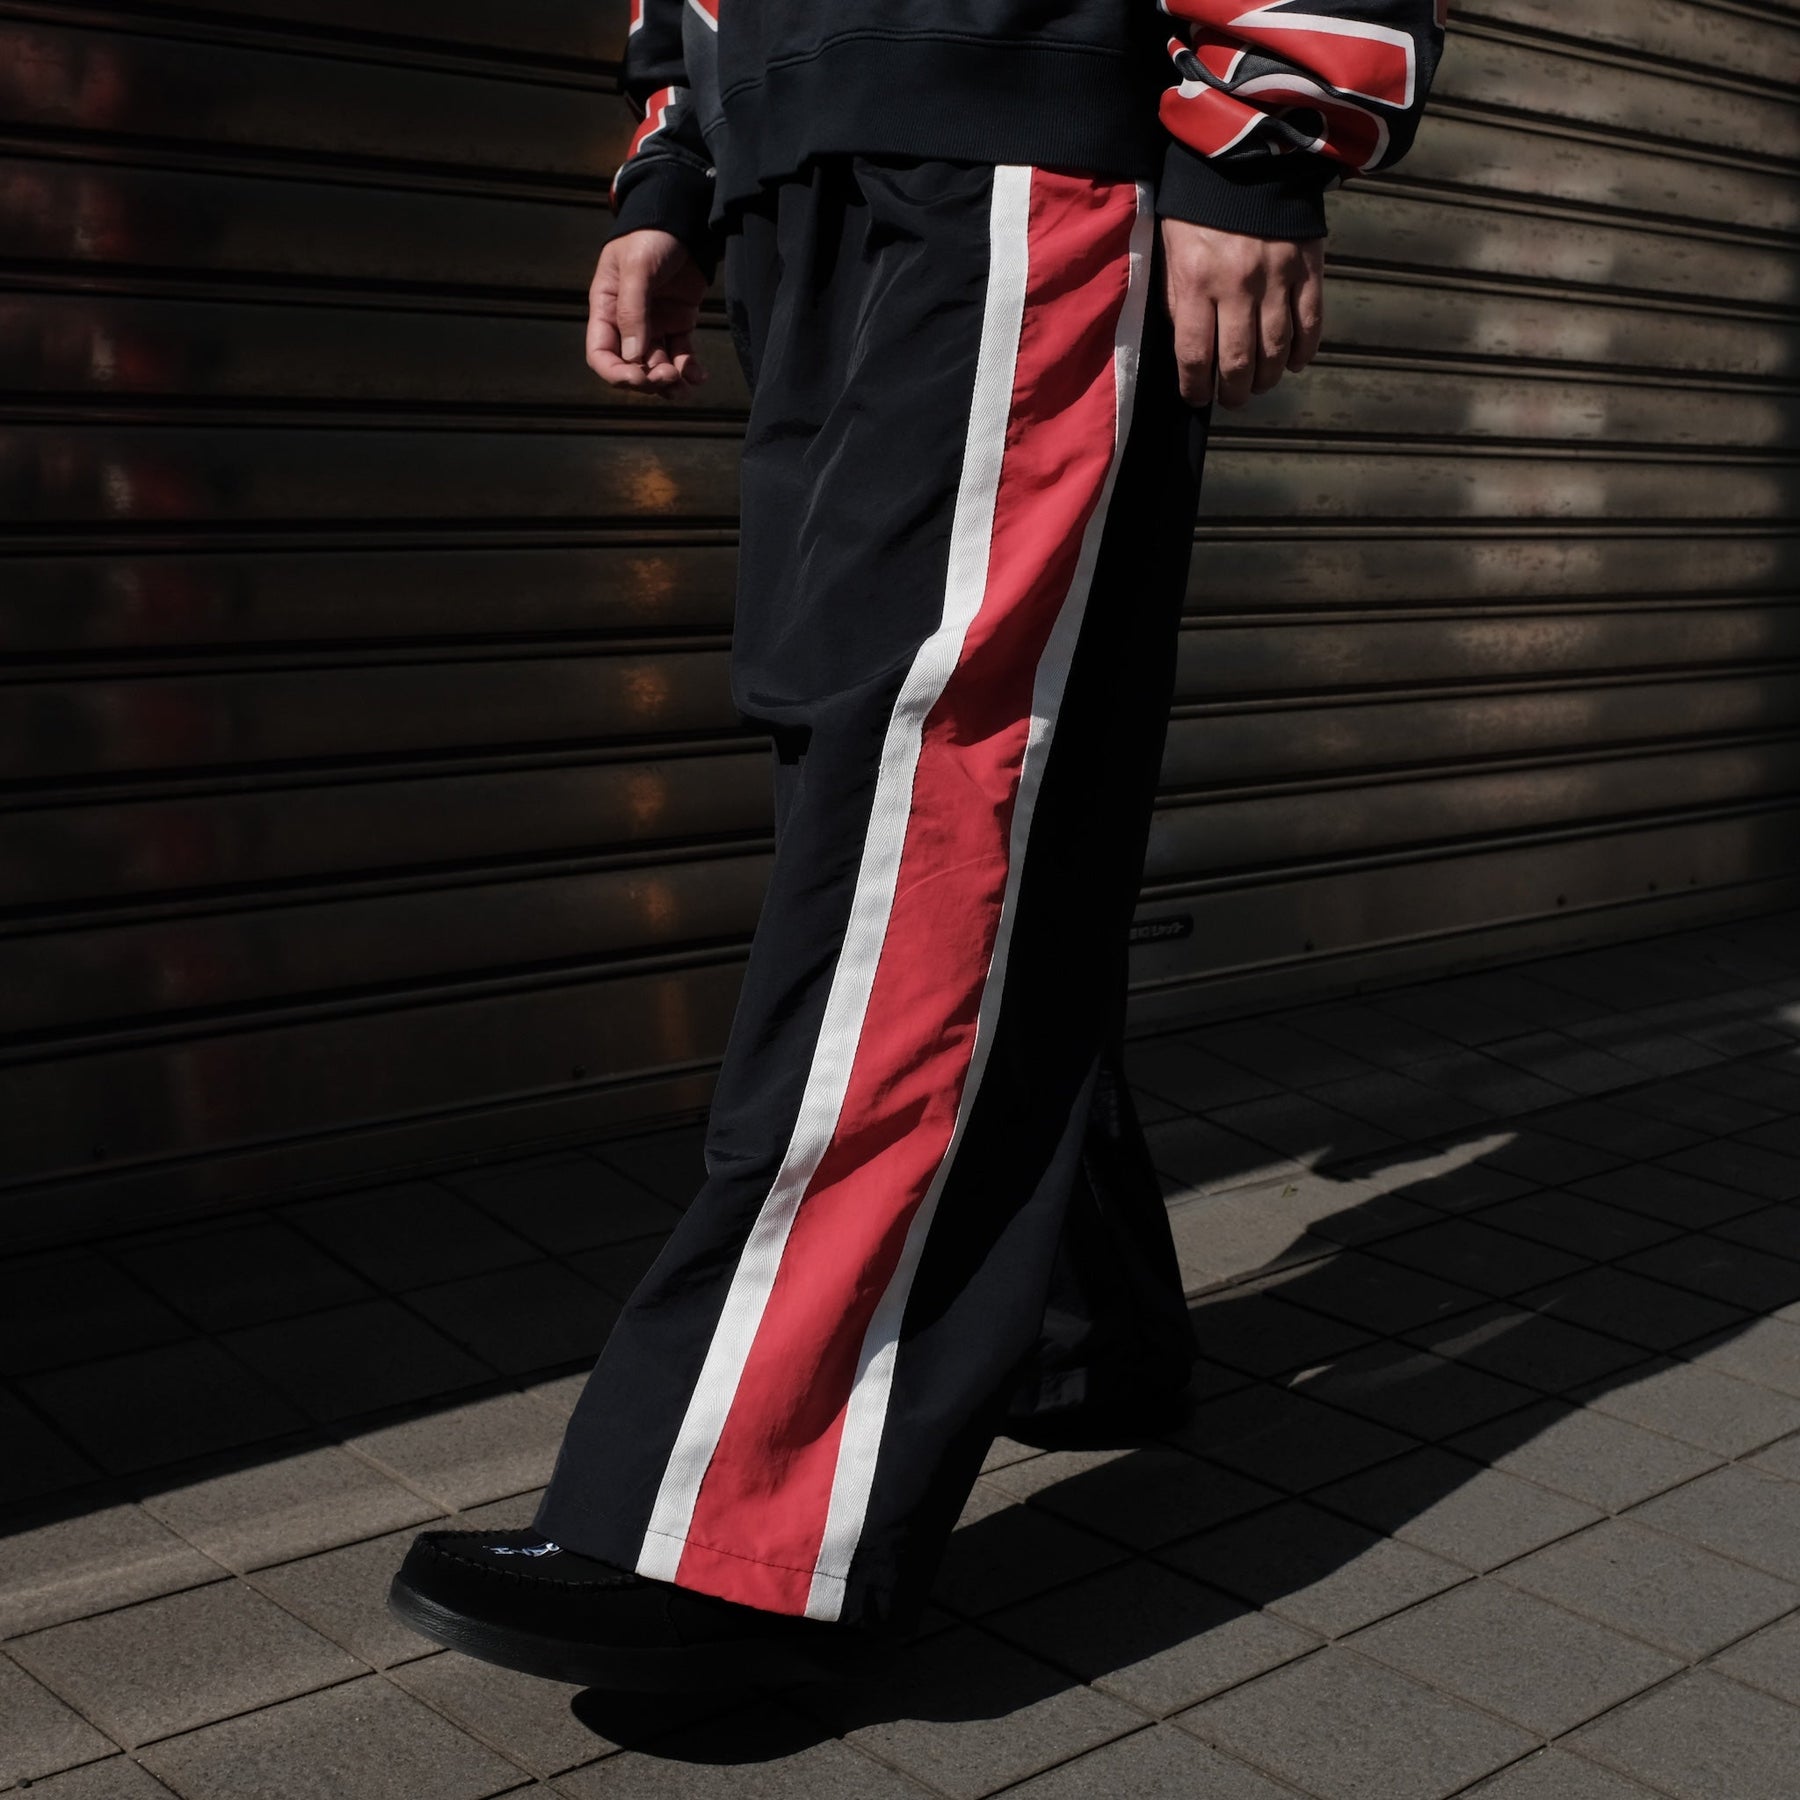 WILLY CHAVARRIA / WINDBREAKER PANTS WILLY DARK NAVY & ROSE RED